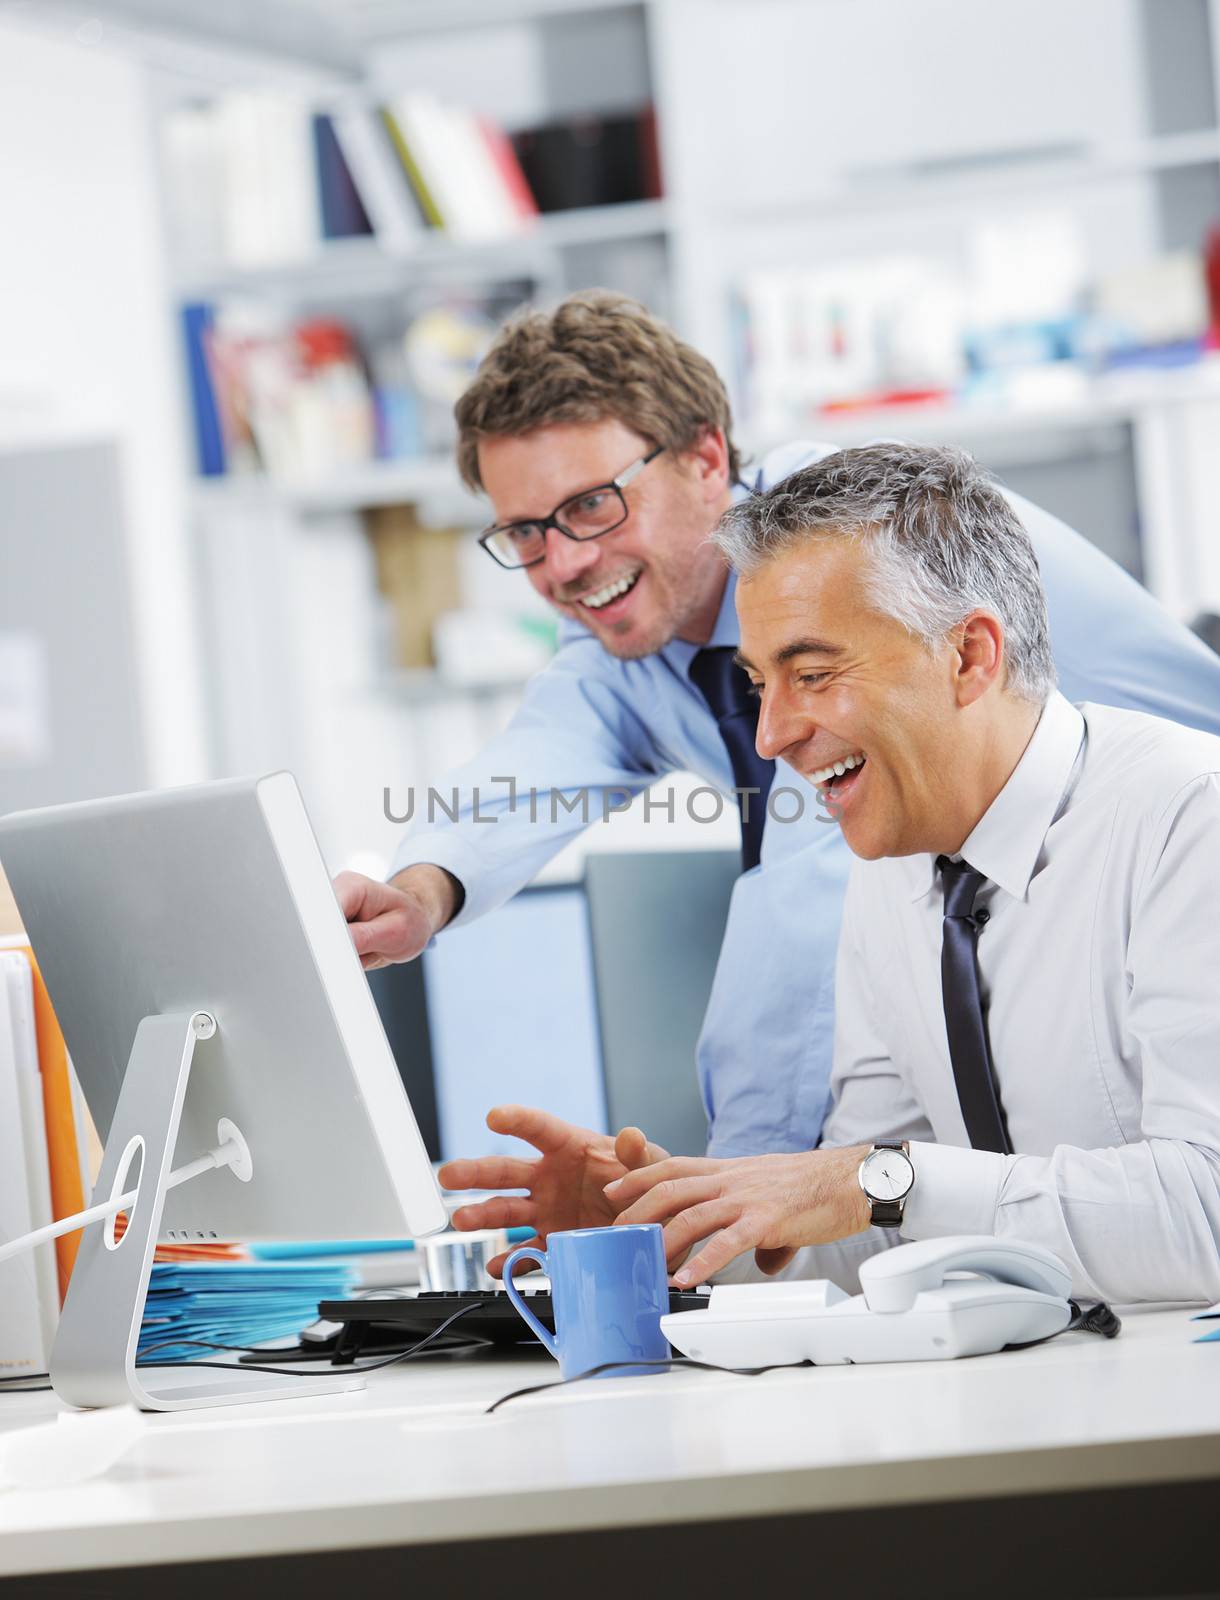 Business people laughing in front of a screen computer